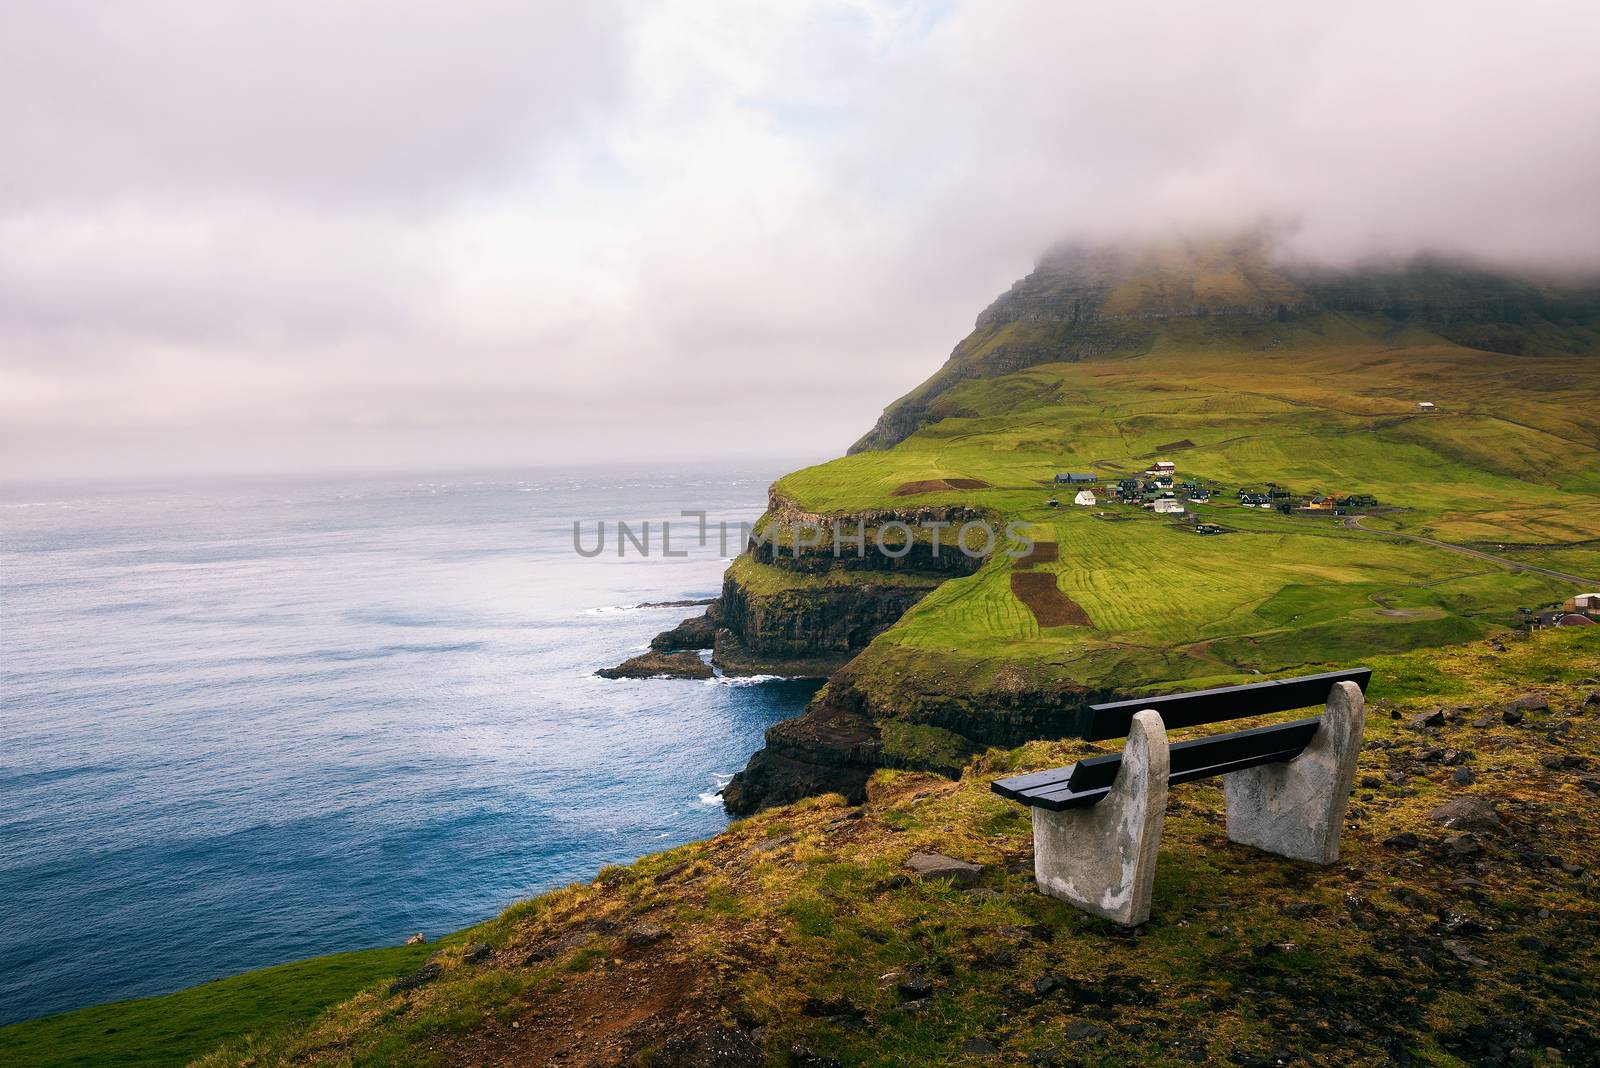 Bench above the village of Gasadalur with views over beautiful faroese scenery and Atlantic Ocean on the island of Vagar, Faroe Islands, Denmark.